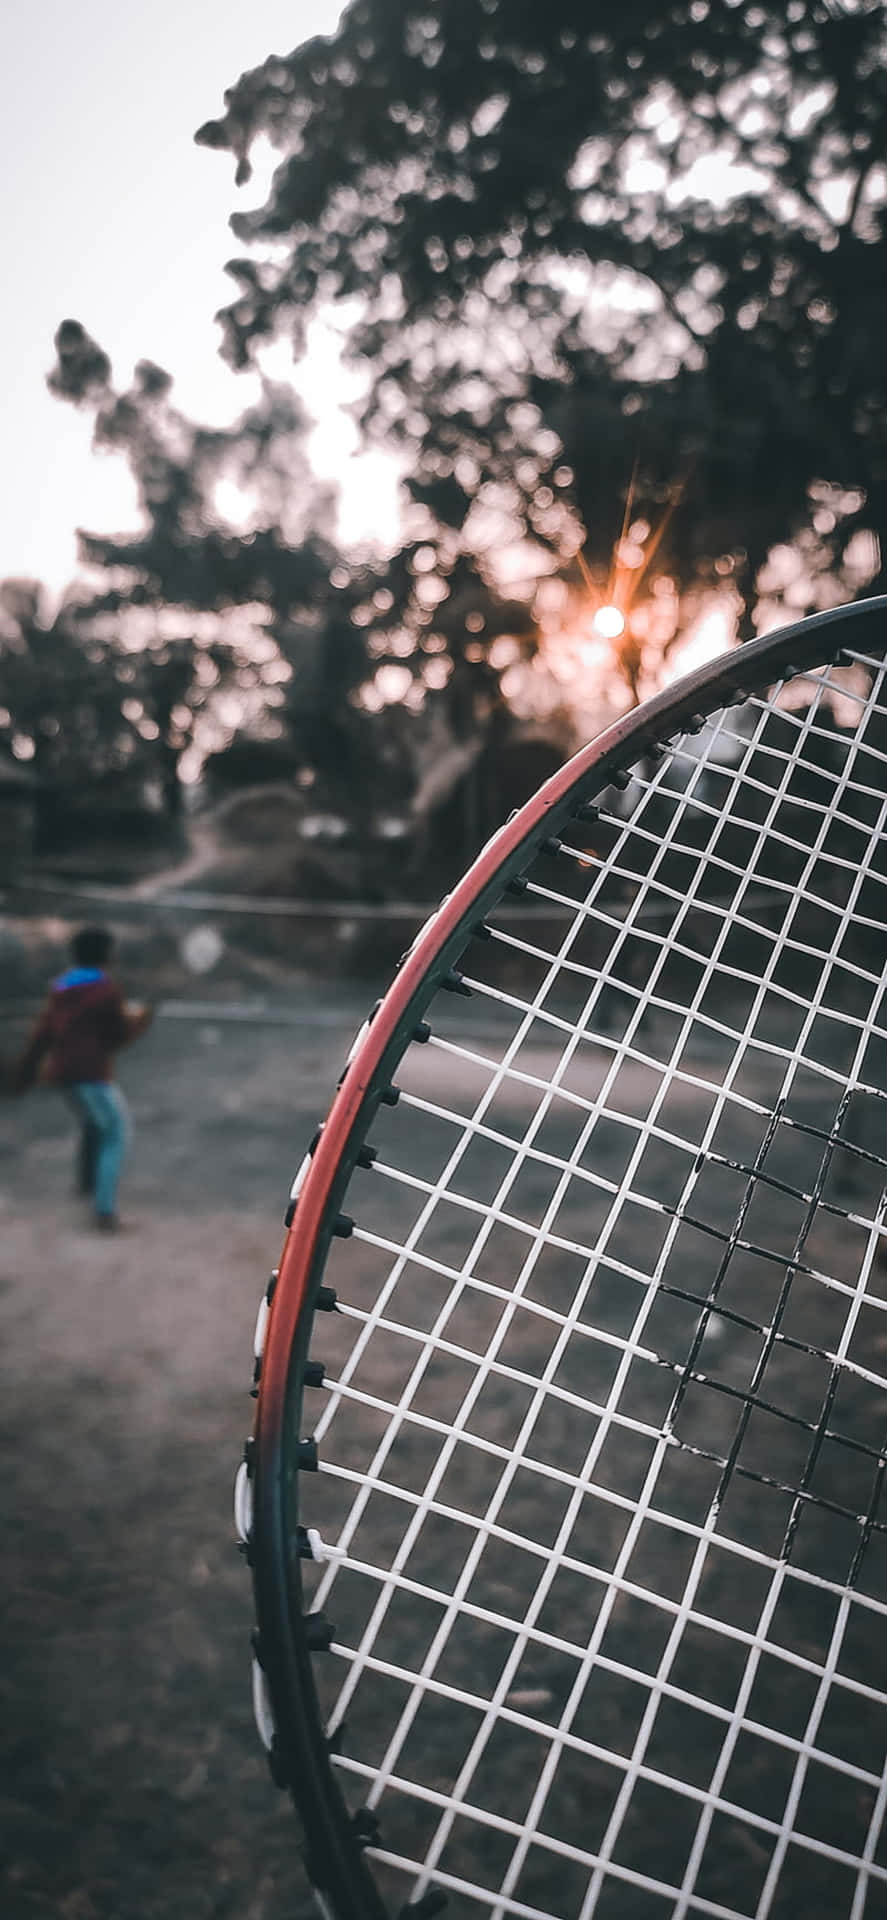 Enjoy the thrill of badminton on the iPhone Xs Max